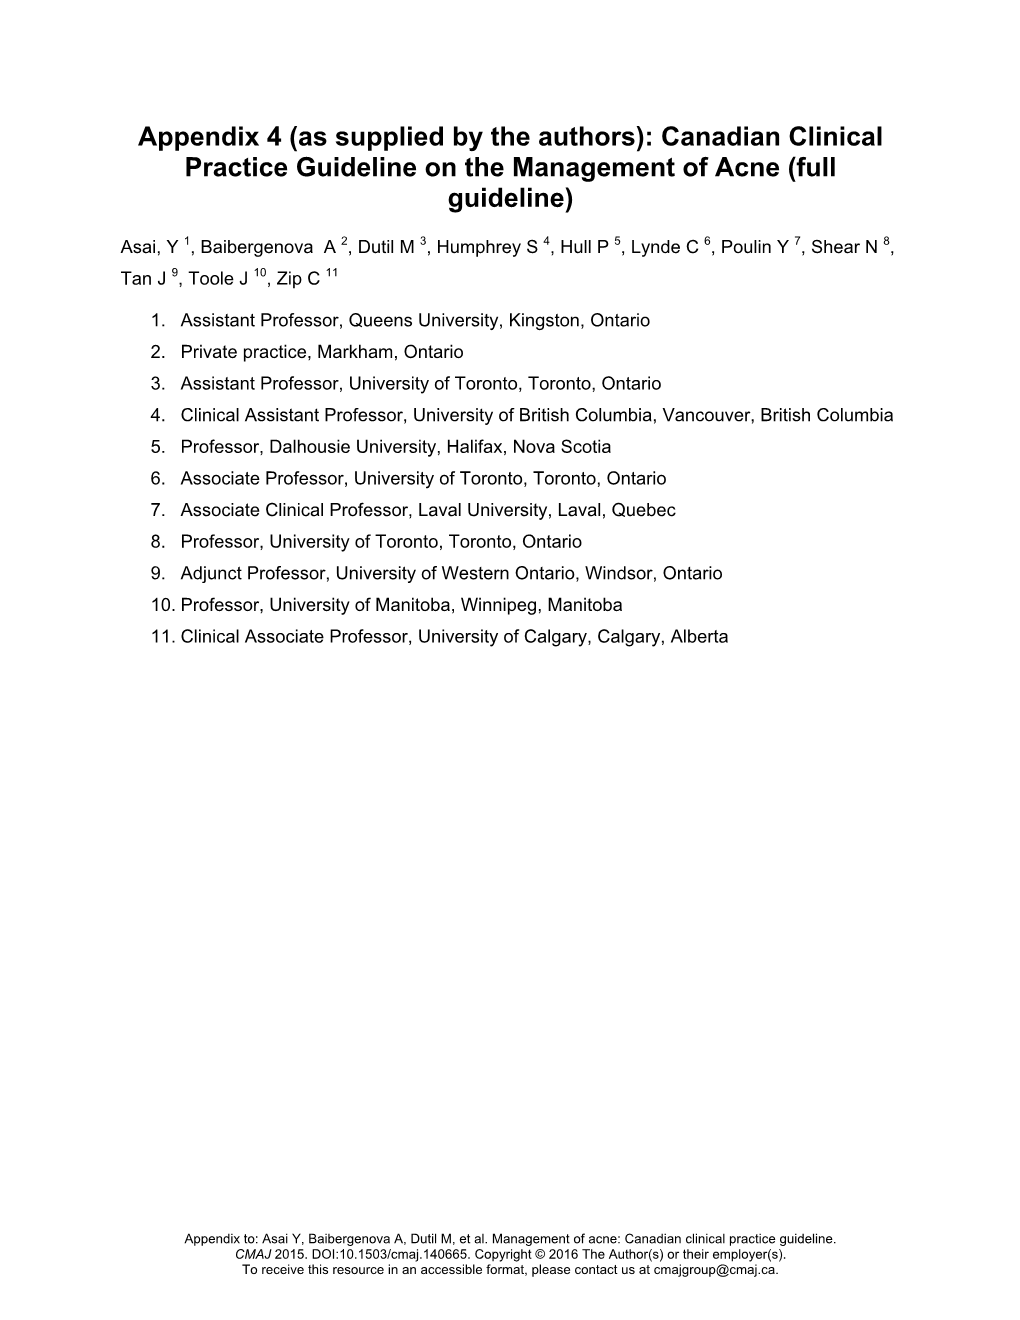 Canadian Clinical Practice Guideline on the Management of Acne (Full Guideline)